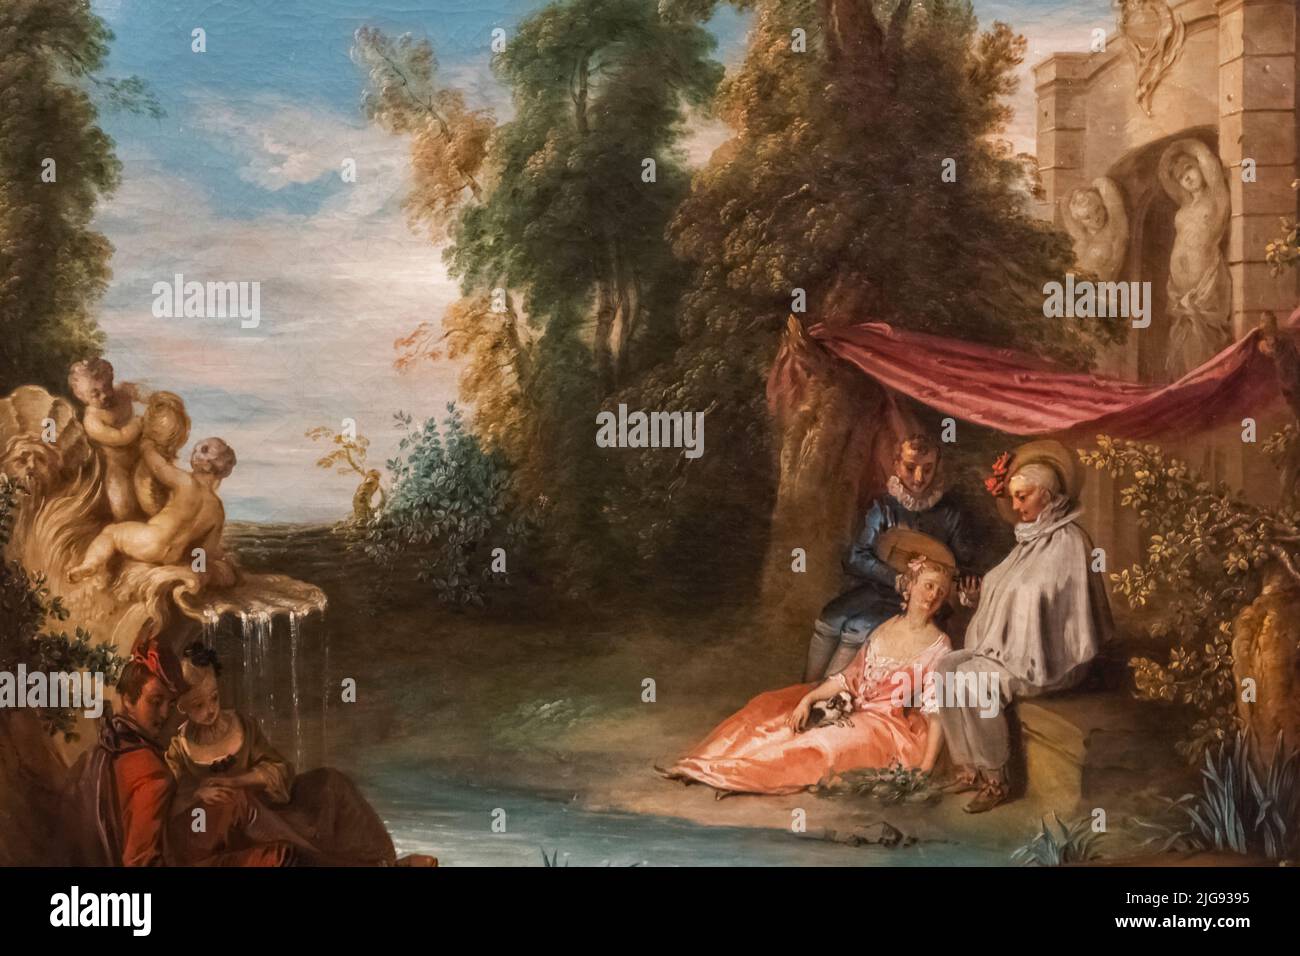 Painting titled "Comedians by a Fountain" by German Artist Philip Mercier dated 1735 Stock Photo